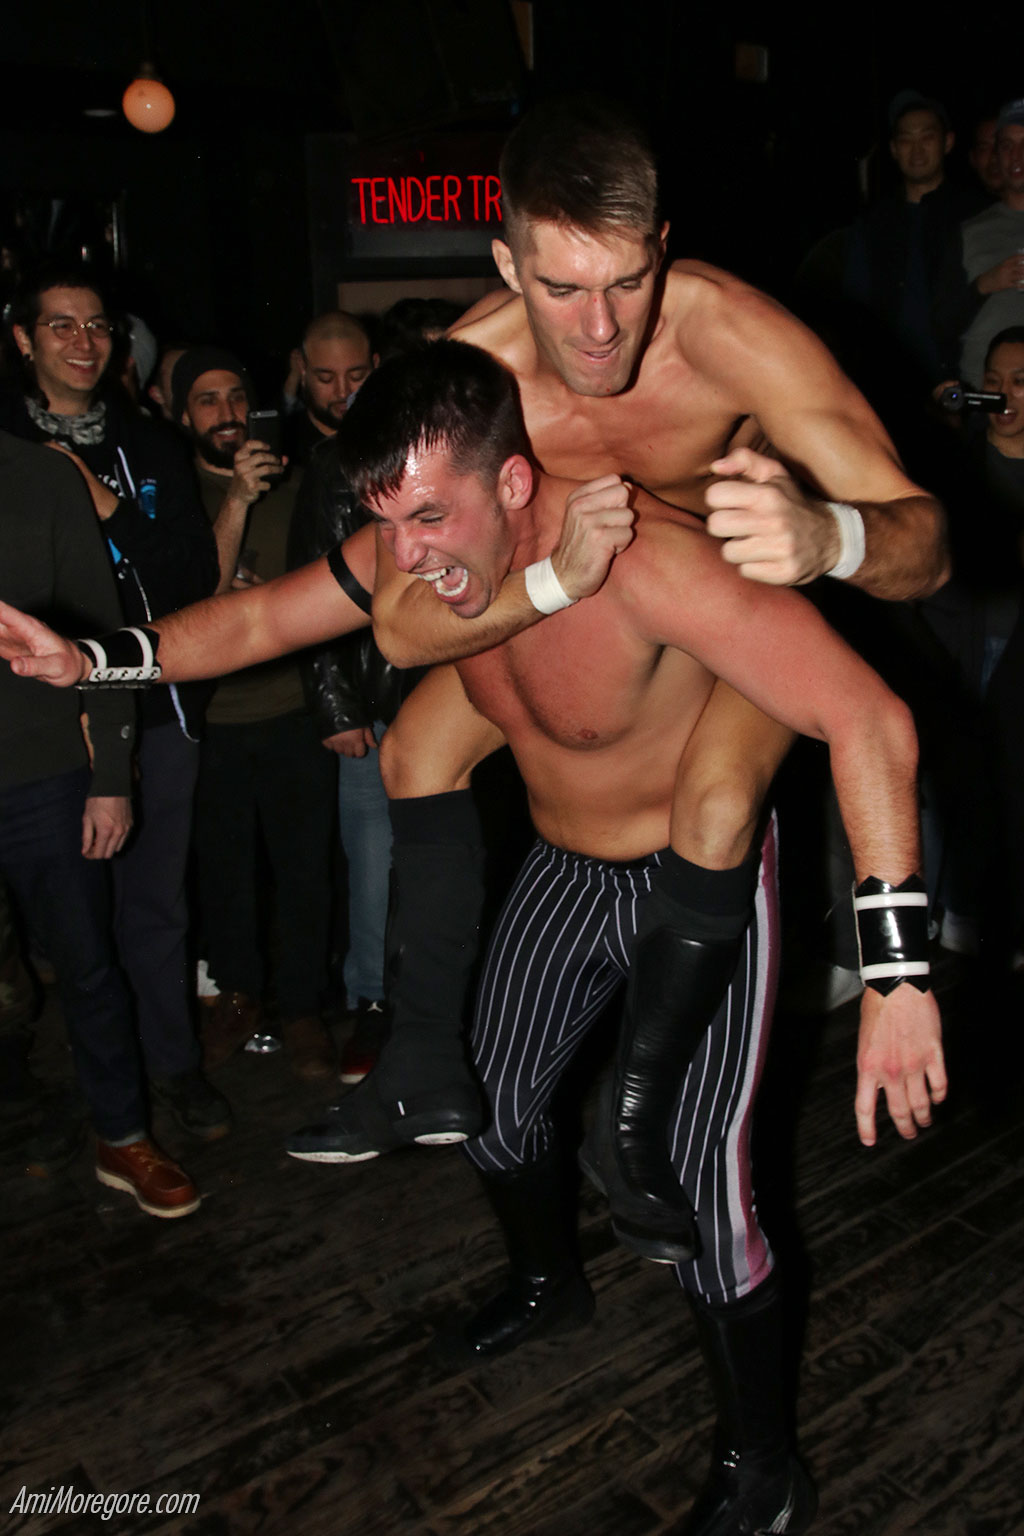 Zack Sabre Jr with a chin lock on Chuck Taylor in a Brooklyn bar - 2018